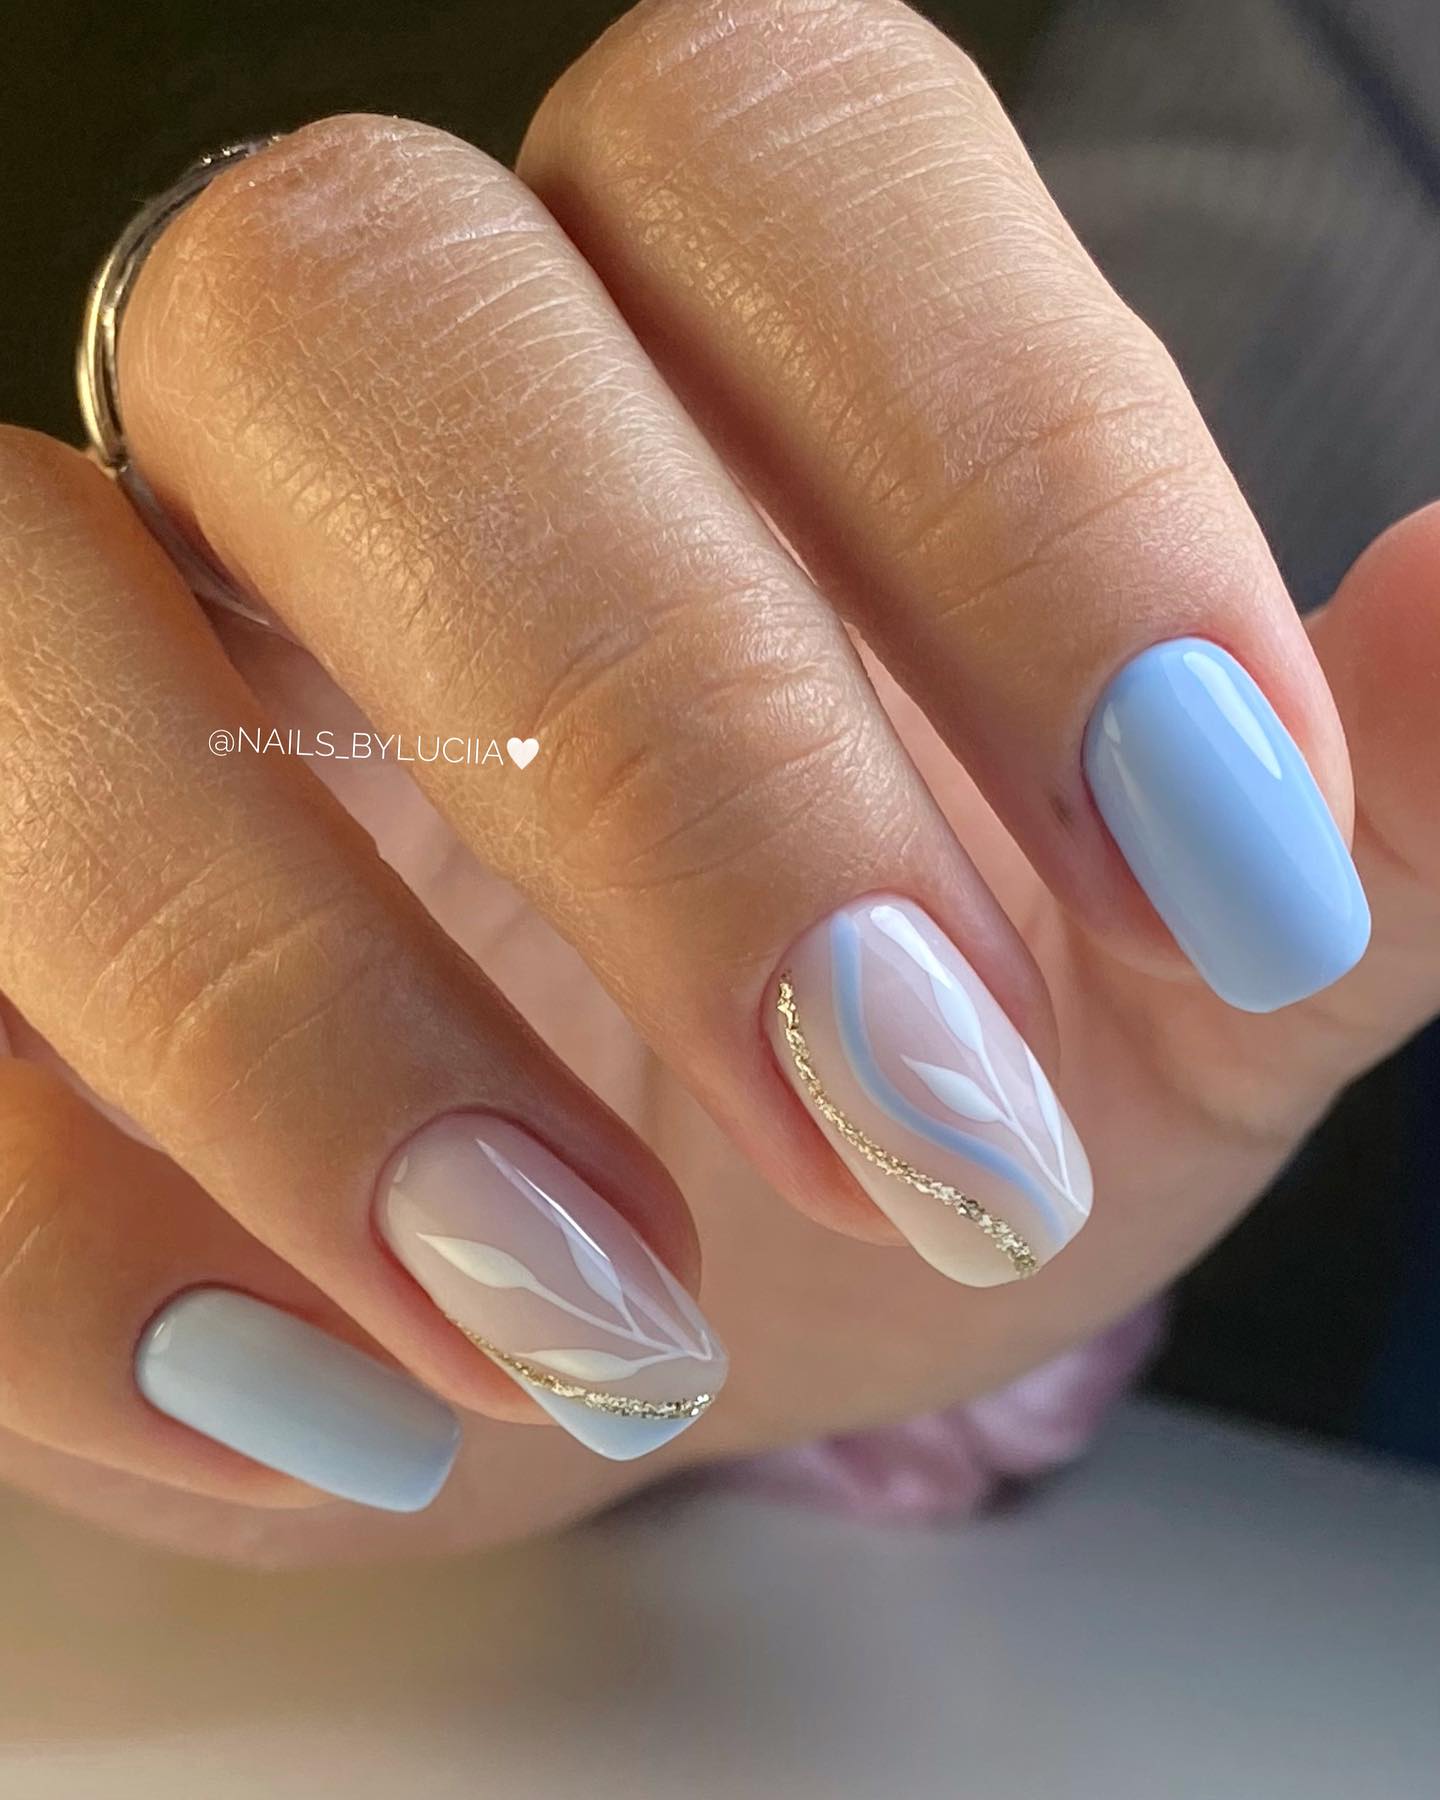 100+ Short Nail Designs You’ll Want To Try This Year images 79